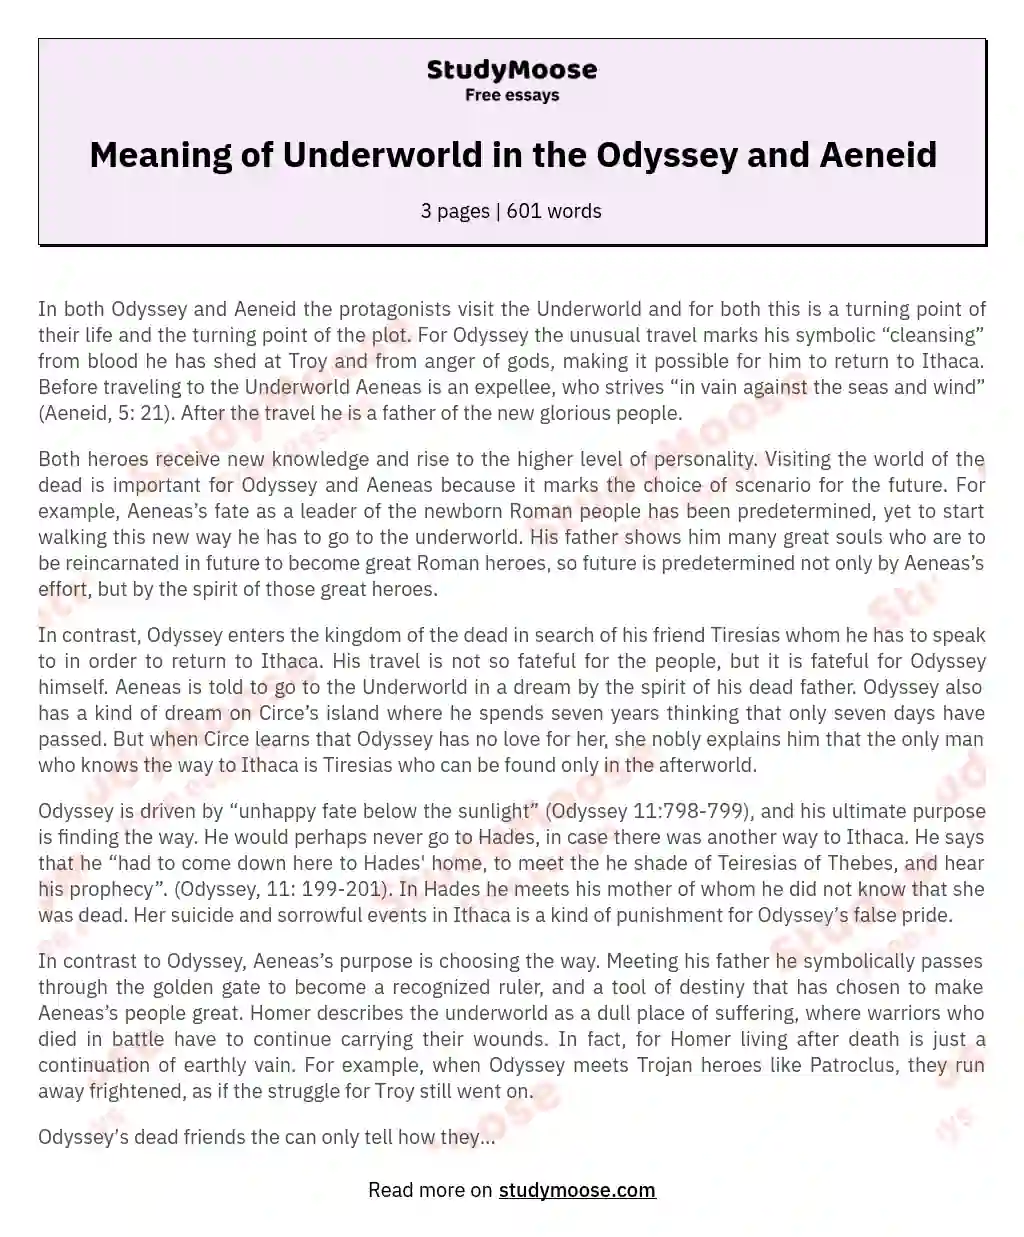 Meaning of Underworld in the Odyssey and Aeneid essay